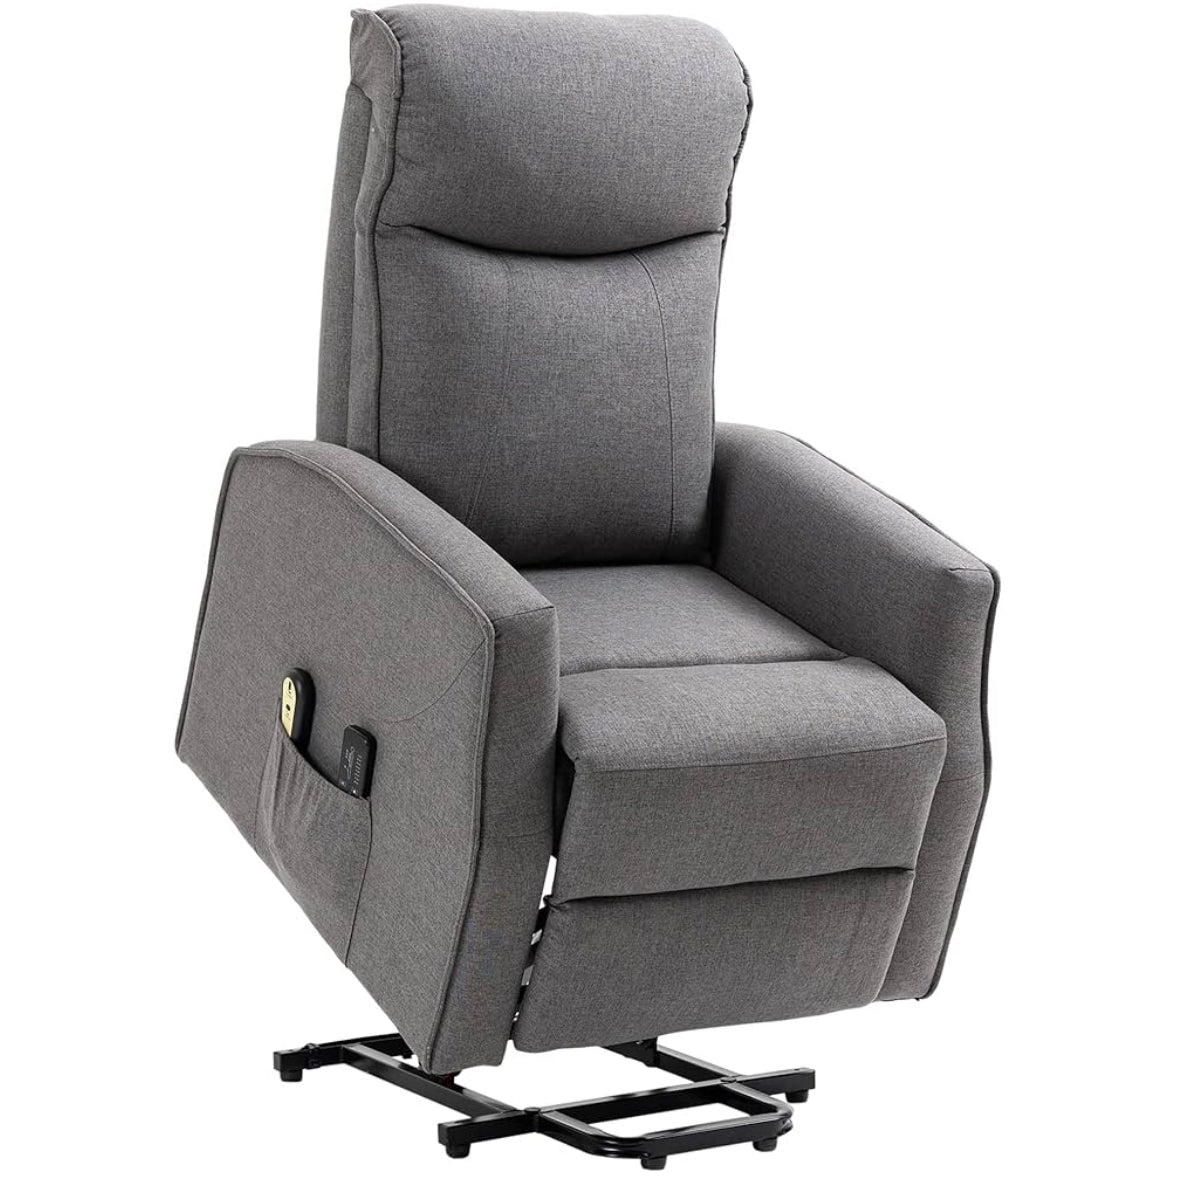 Image of Gray Electric Lift Chair Recliners for Seniors